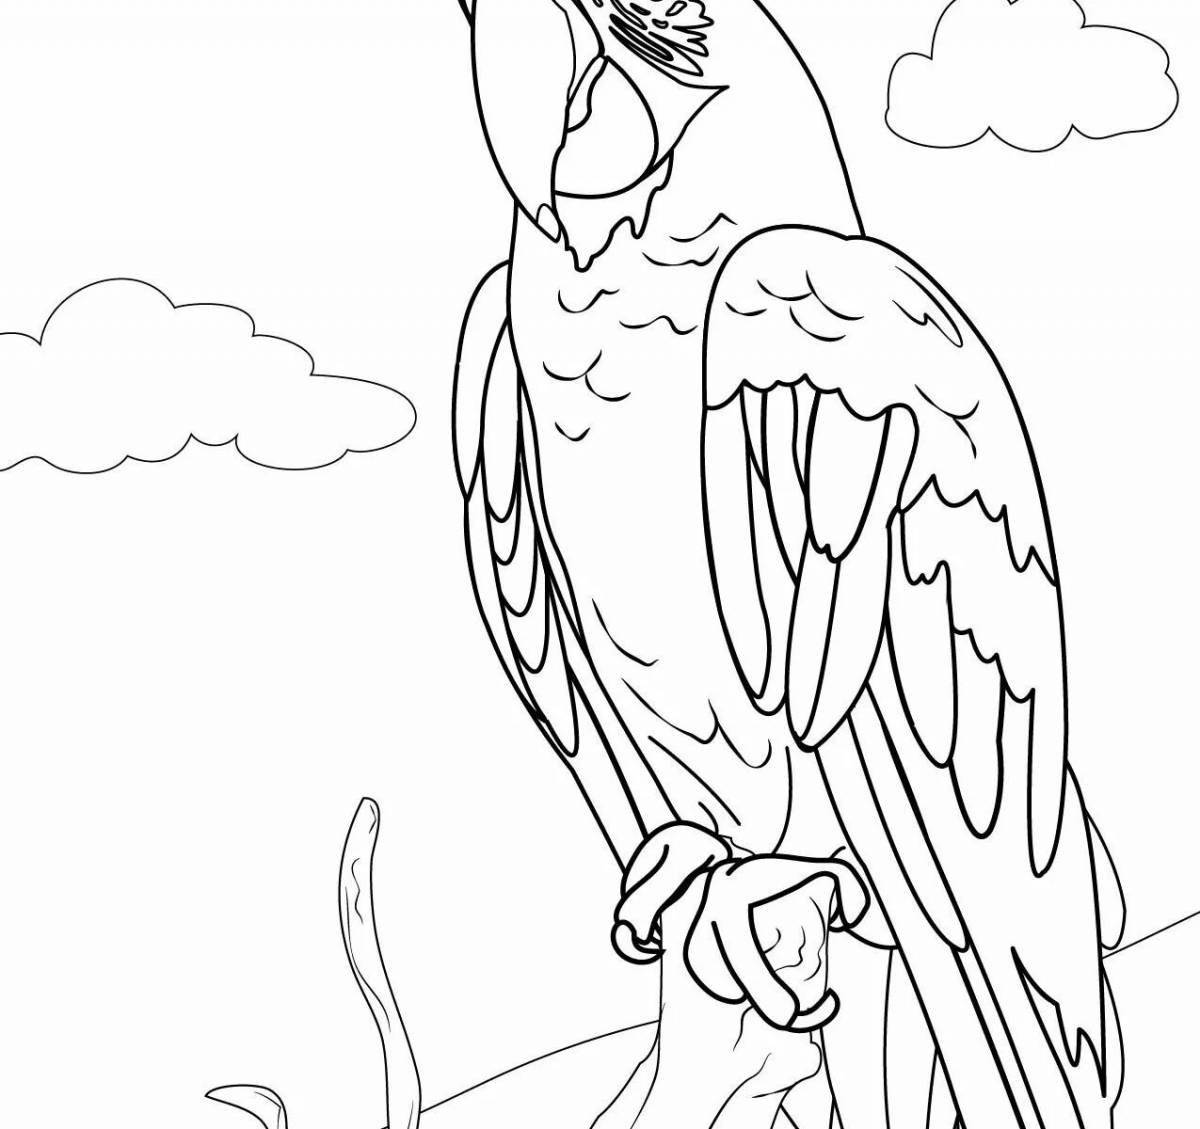 Wonderful macaw coloring book for kids